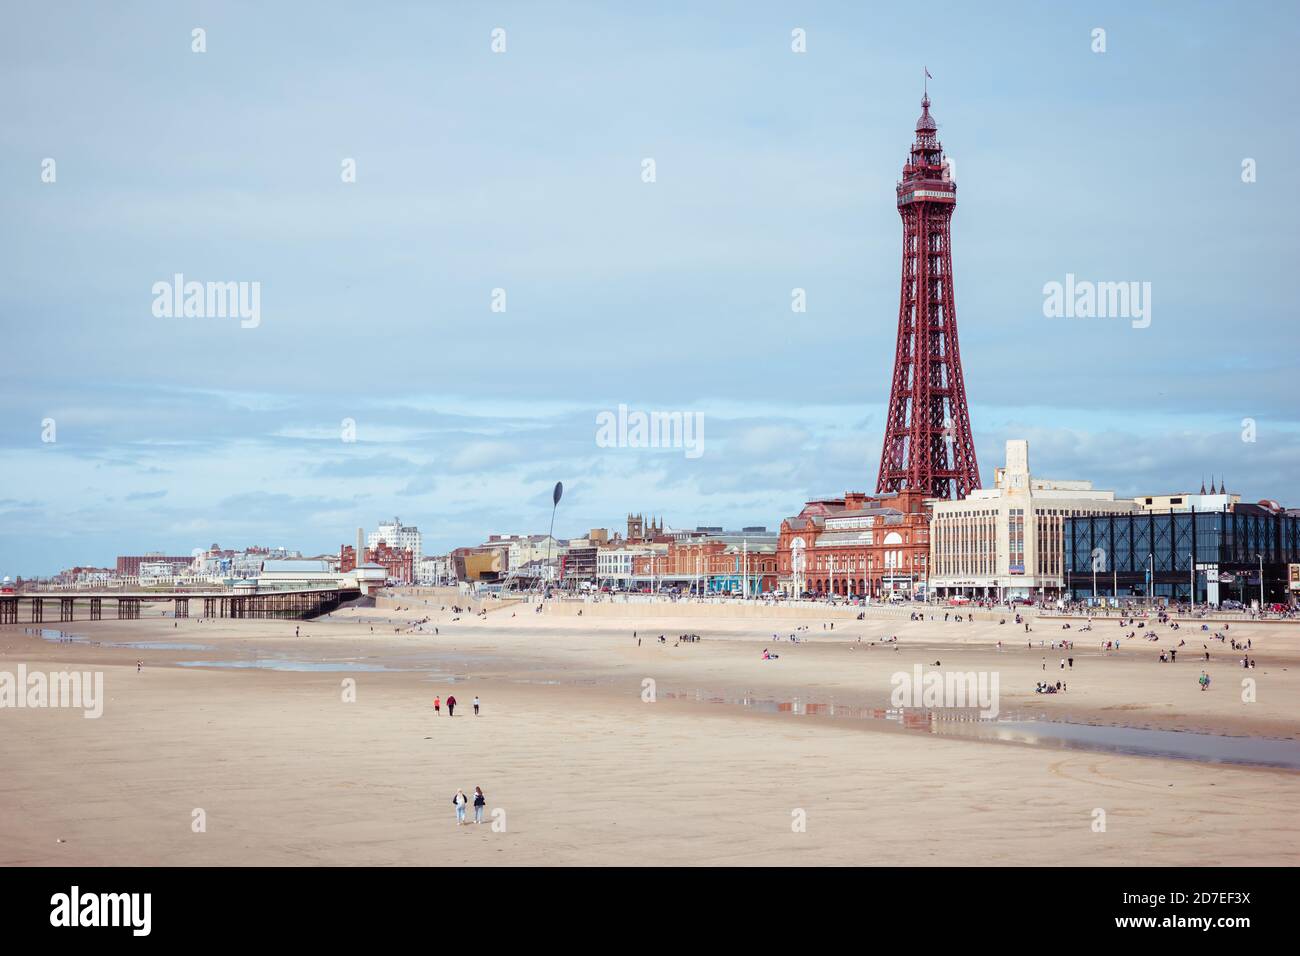 Blackpool beach, tower and landscape showing socially distant tourists Stock Photo